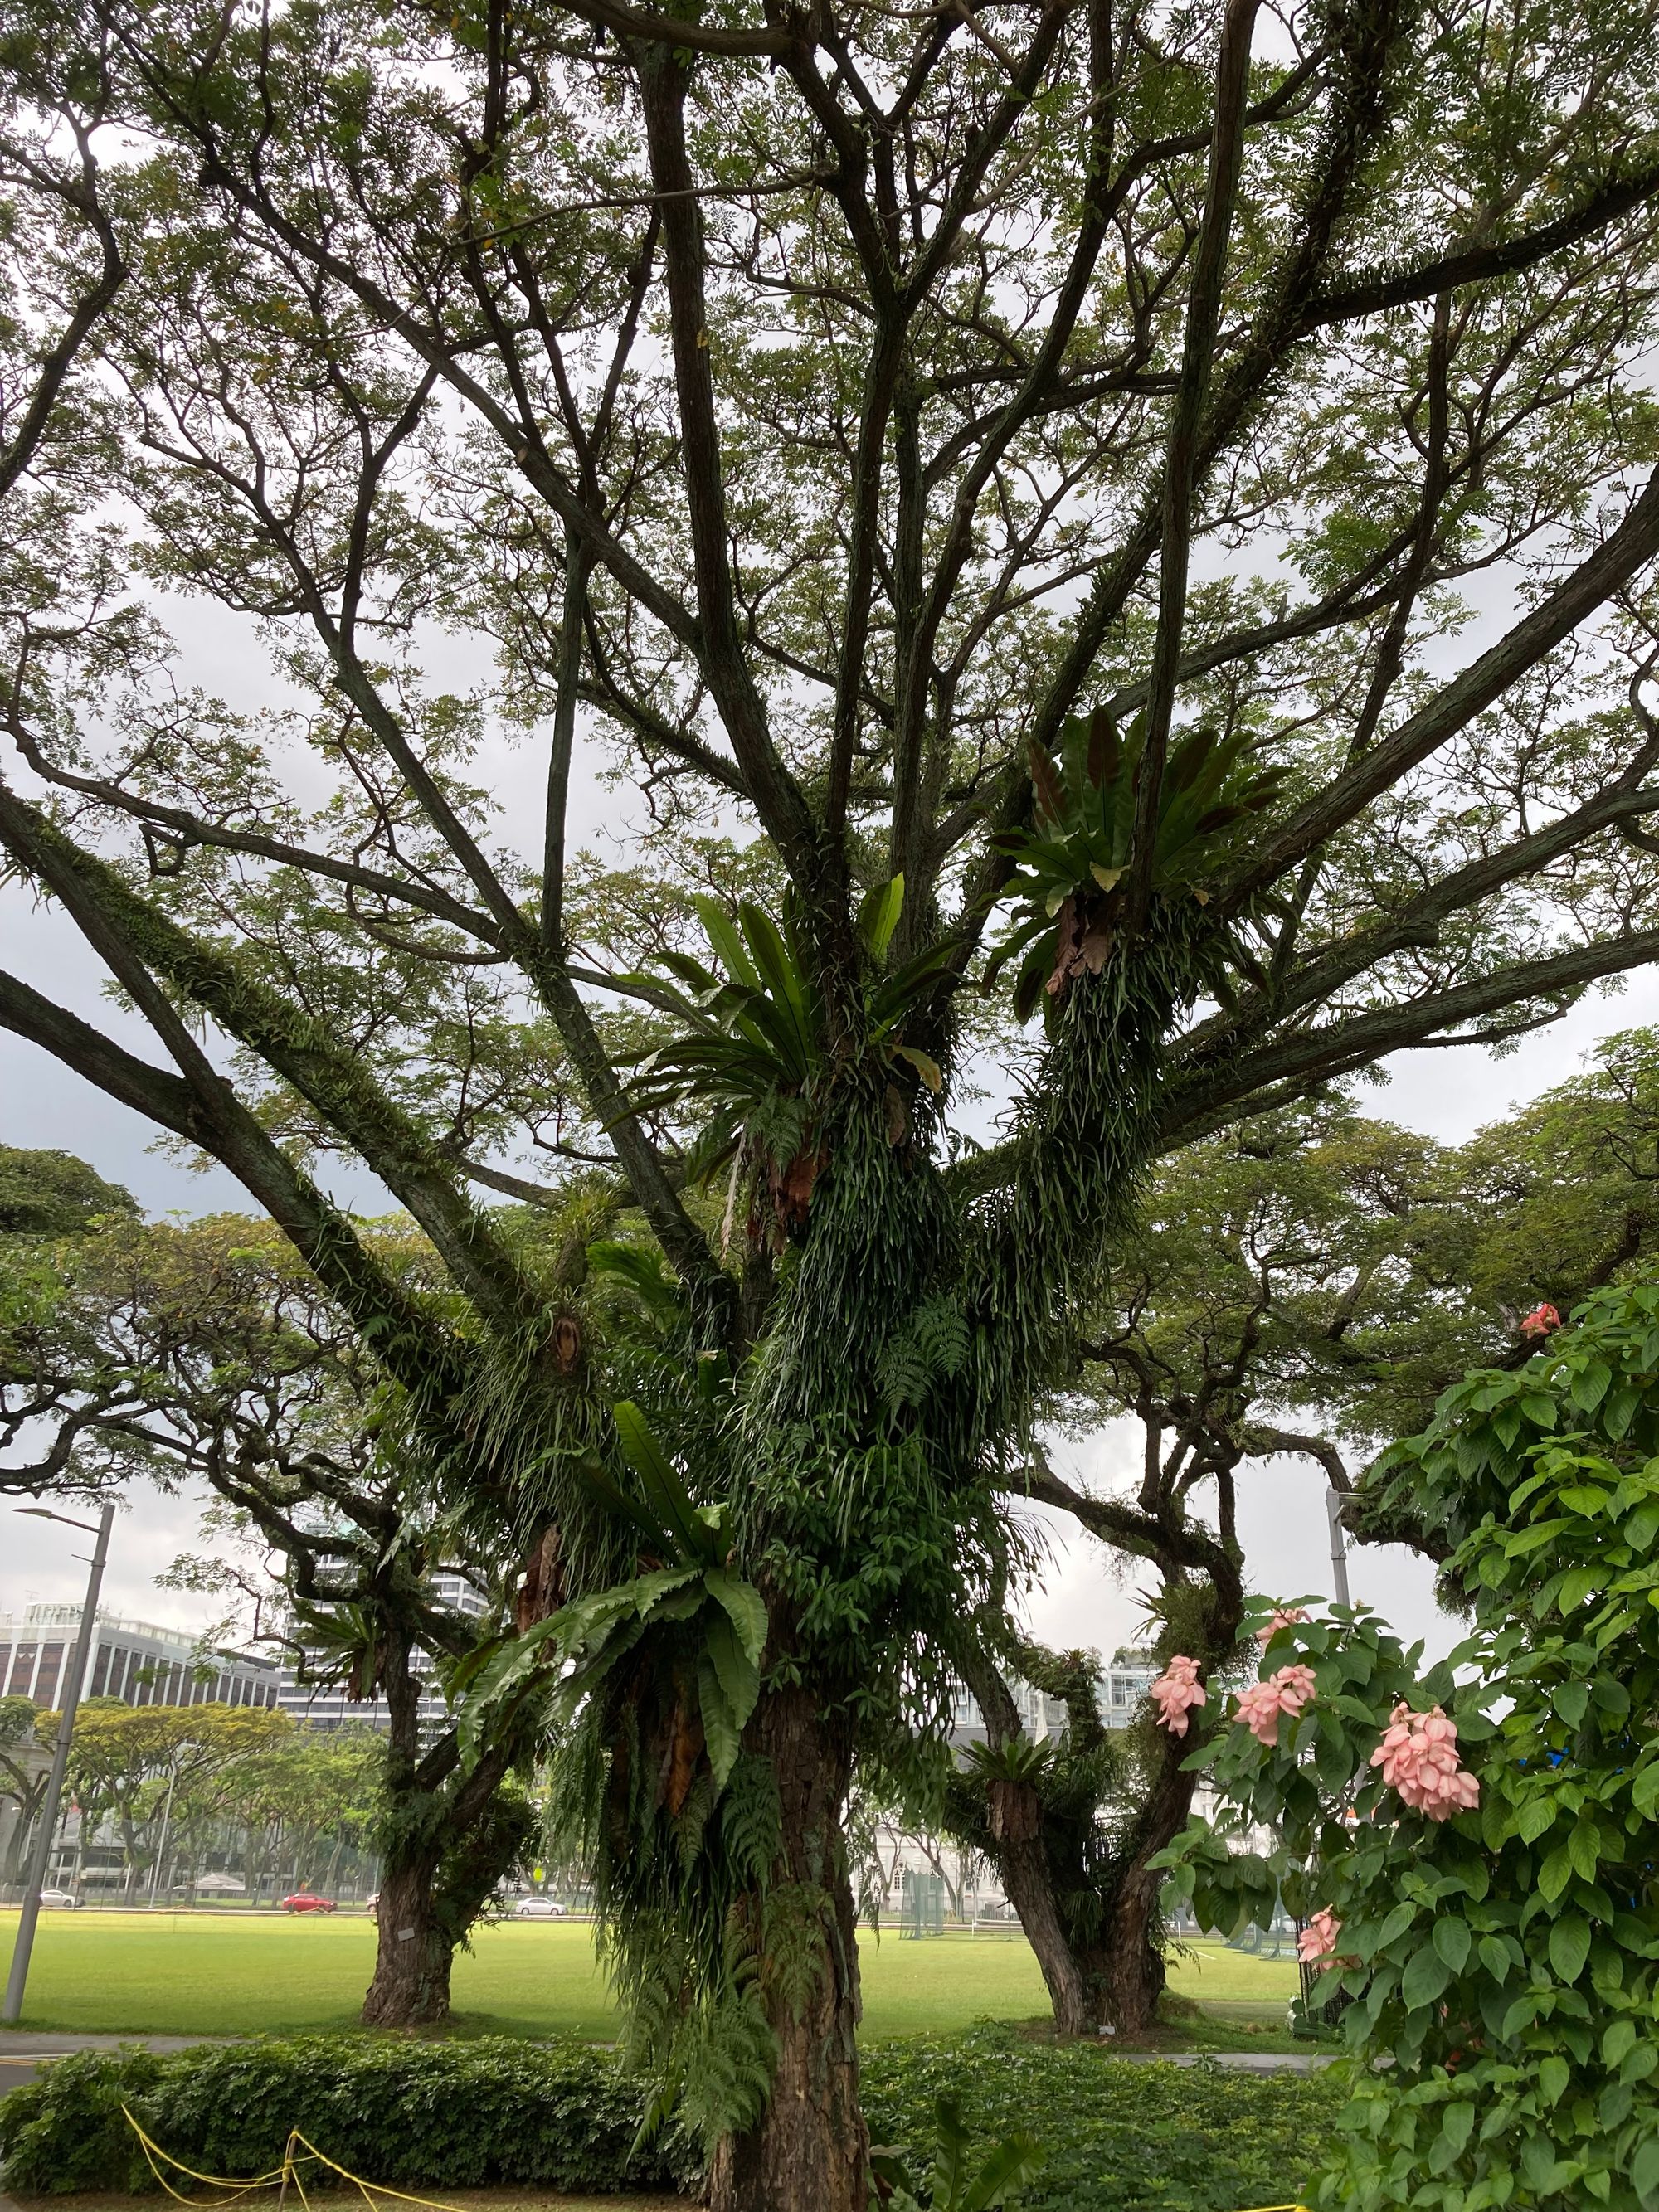 The trunk of a rain tree bedecked by a variety of ferns, both large and small. there are two more rain trees in the background.